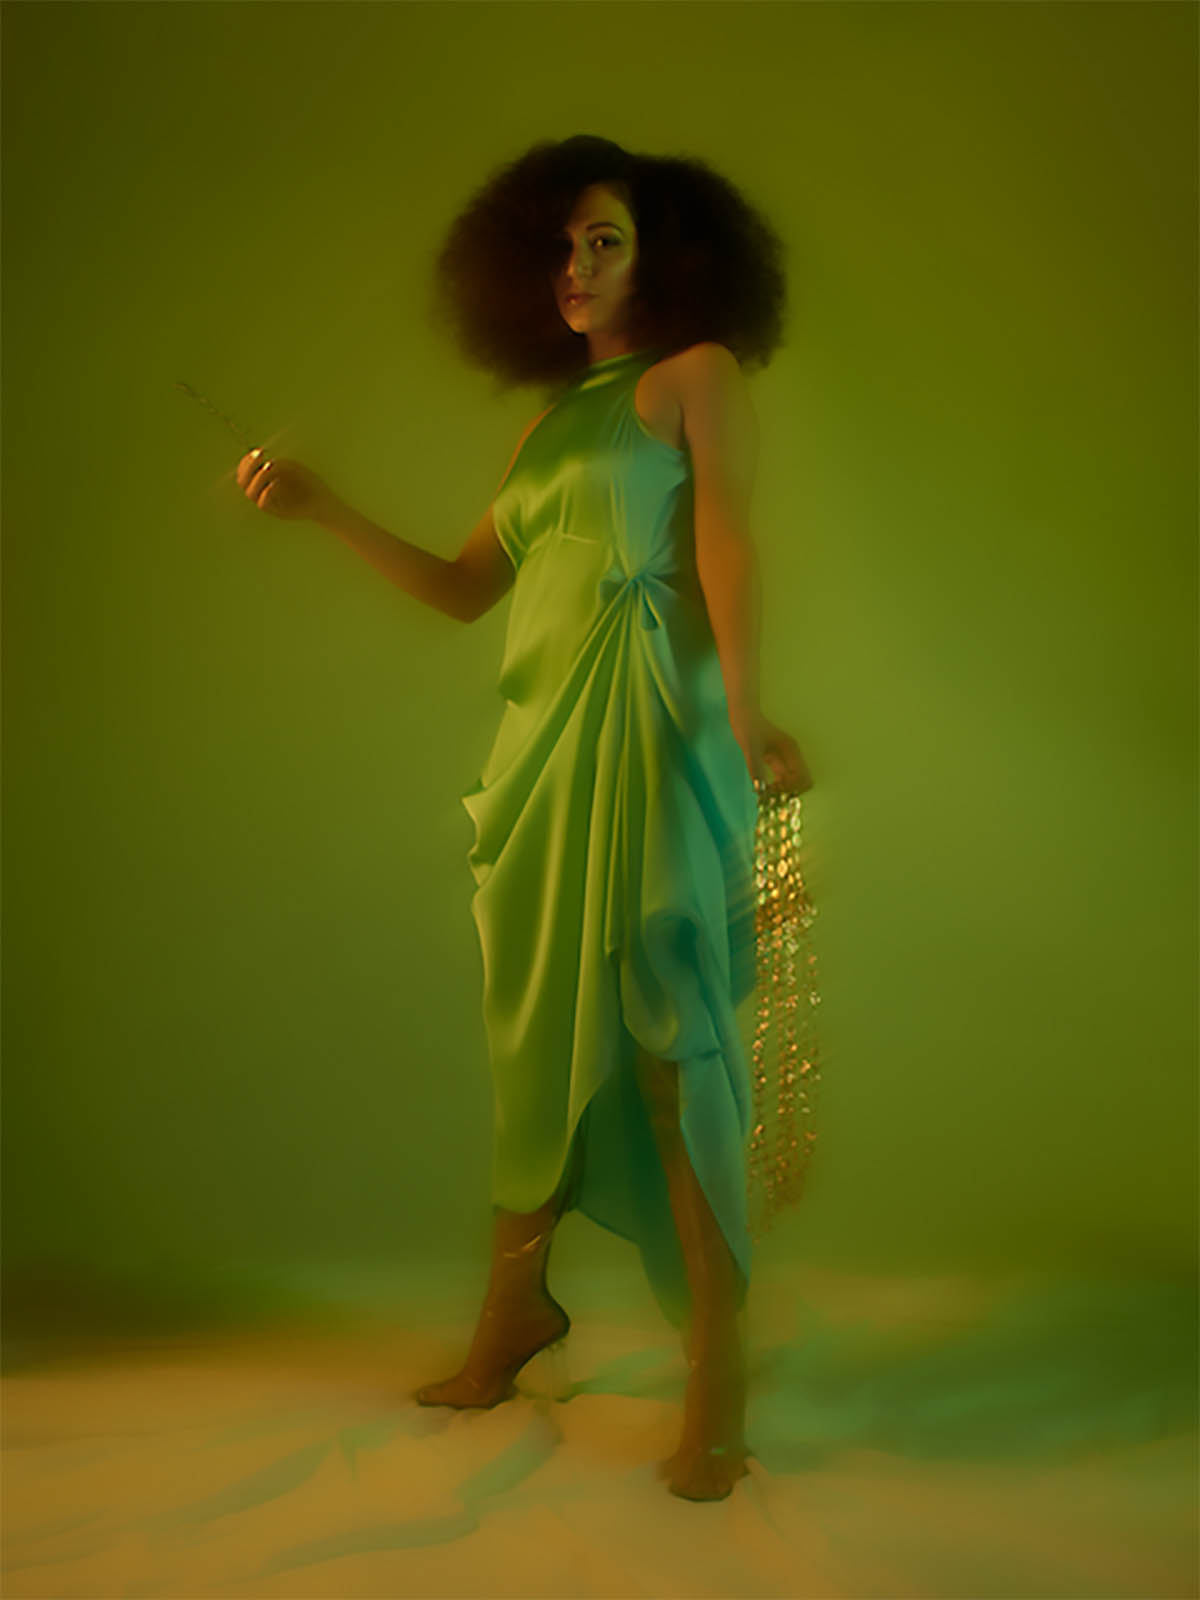 A woman with black, voluminous afro curls stands upright in the centre of the picture, looking into the camera. Her right eye is covered by her hair. It is houaïda, wearing a light green, silk, shoulderless dress that is high-collared. There is a gathering at the waist on the left that pulls the skirt part up on one side. She wears transparent colourless high heel boots. Her fingernails are painted gold. In her right hand she holds what looks like a branch in front of herself, her left hand is hanging next to her body and she holds long golden jewellery chains. The background is green to match her dress.